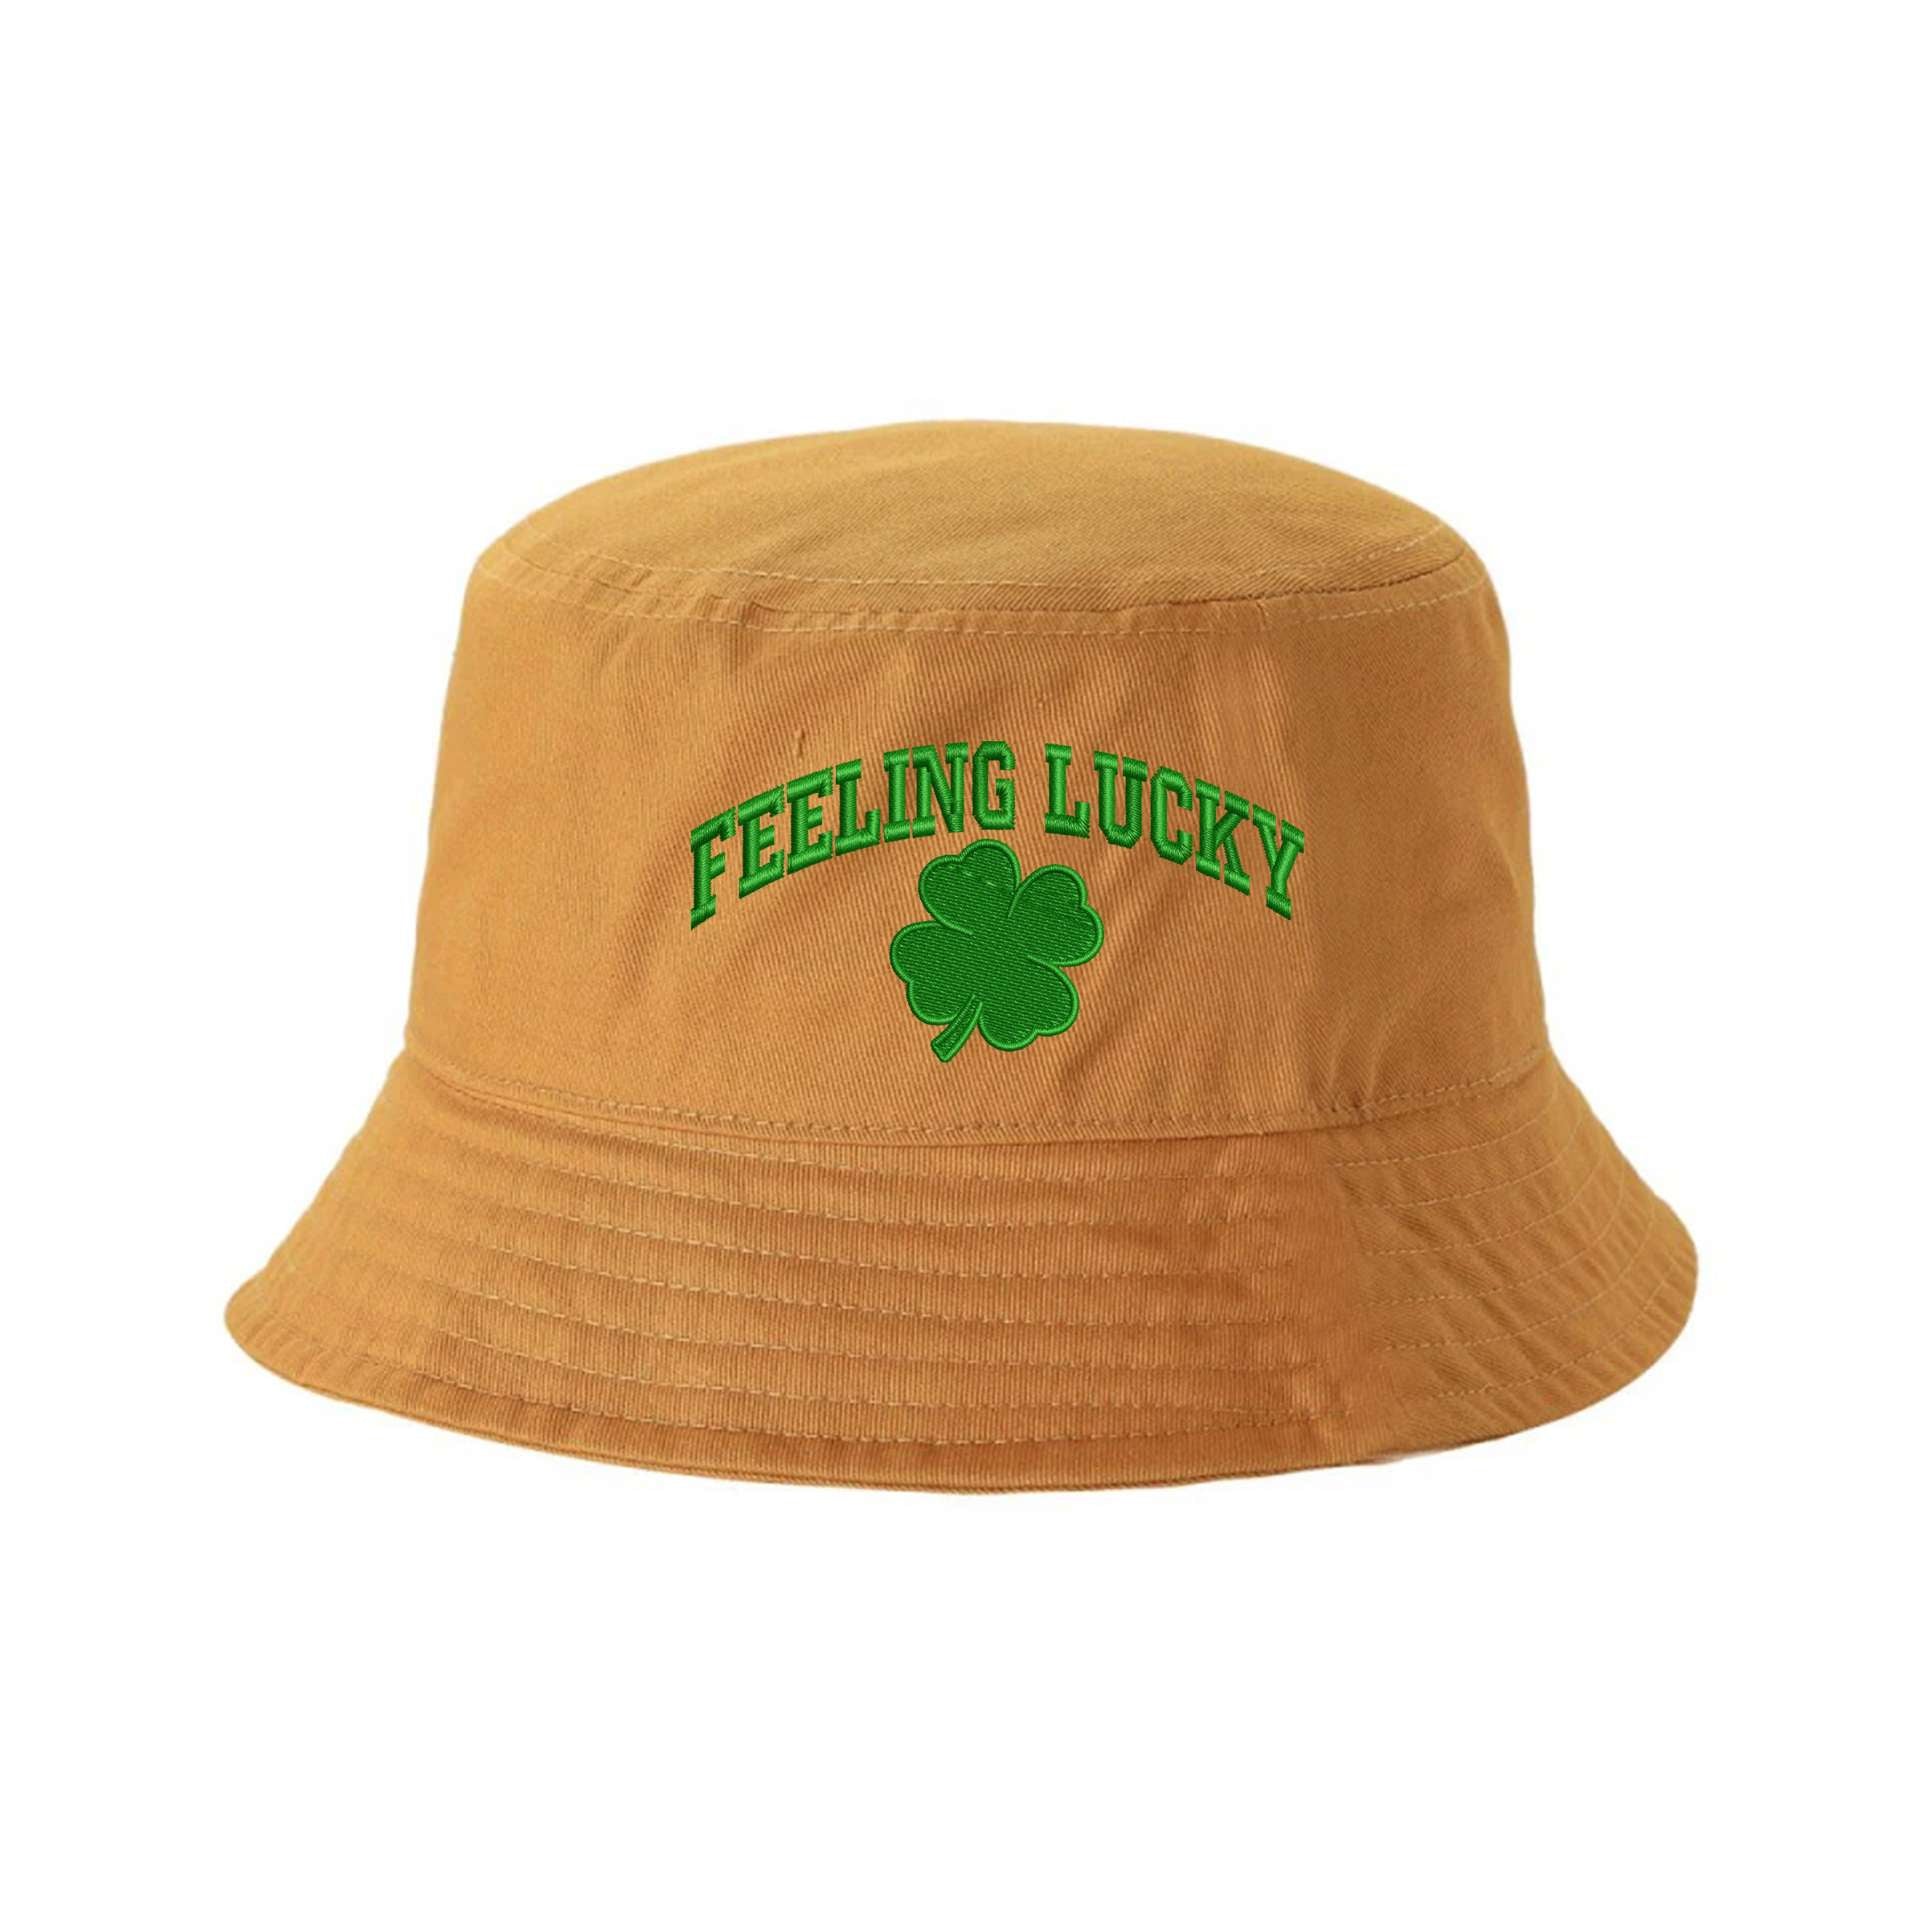 Mustard Bucket Hat embroidered with Feeling Lucky - DSY Lifestyle